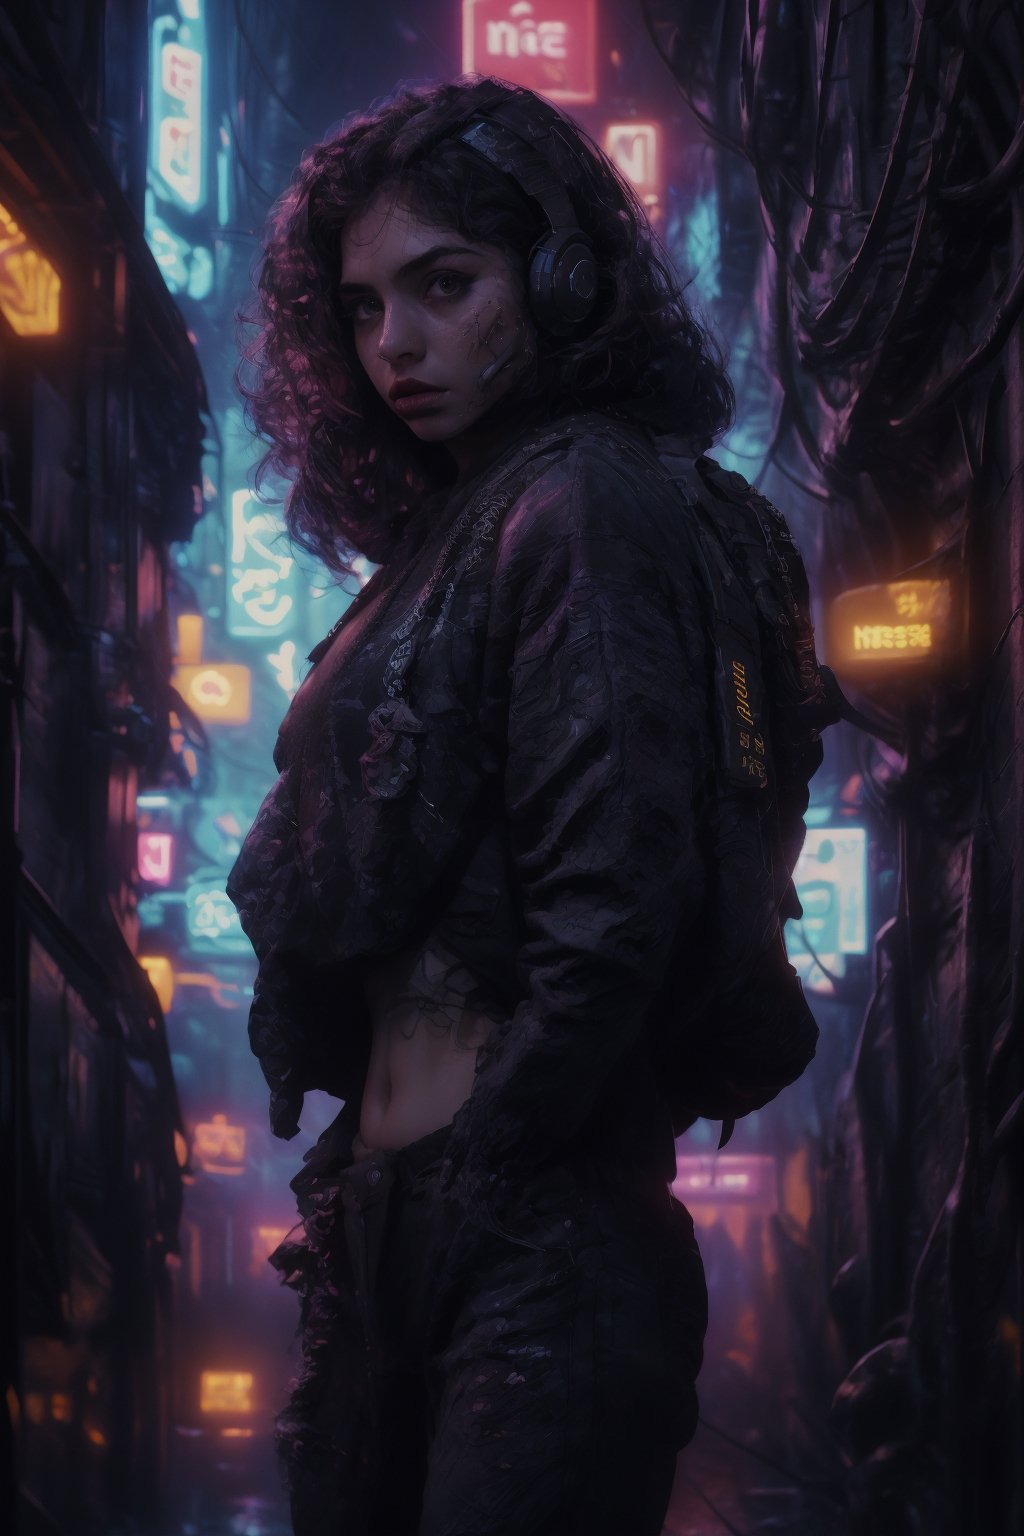 Mallu curly hair, sexy, Crop top, navel, busty, 22 yo , neon colour, cinematic colour grading, Dreampolis, hyper-detailed digital illustration, cyberpunk, single girl with techsuite hoodie and headphones in the street, neon lights, lighting bar, city, cyberpunk city, film still, backpack, in megapolis, pro-lighting, high-res, masterpiece,photorealistic,22yo girl ,1 girl,midjourney,CyberpunkWorld